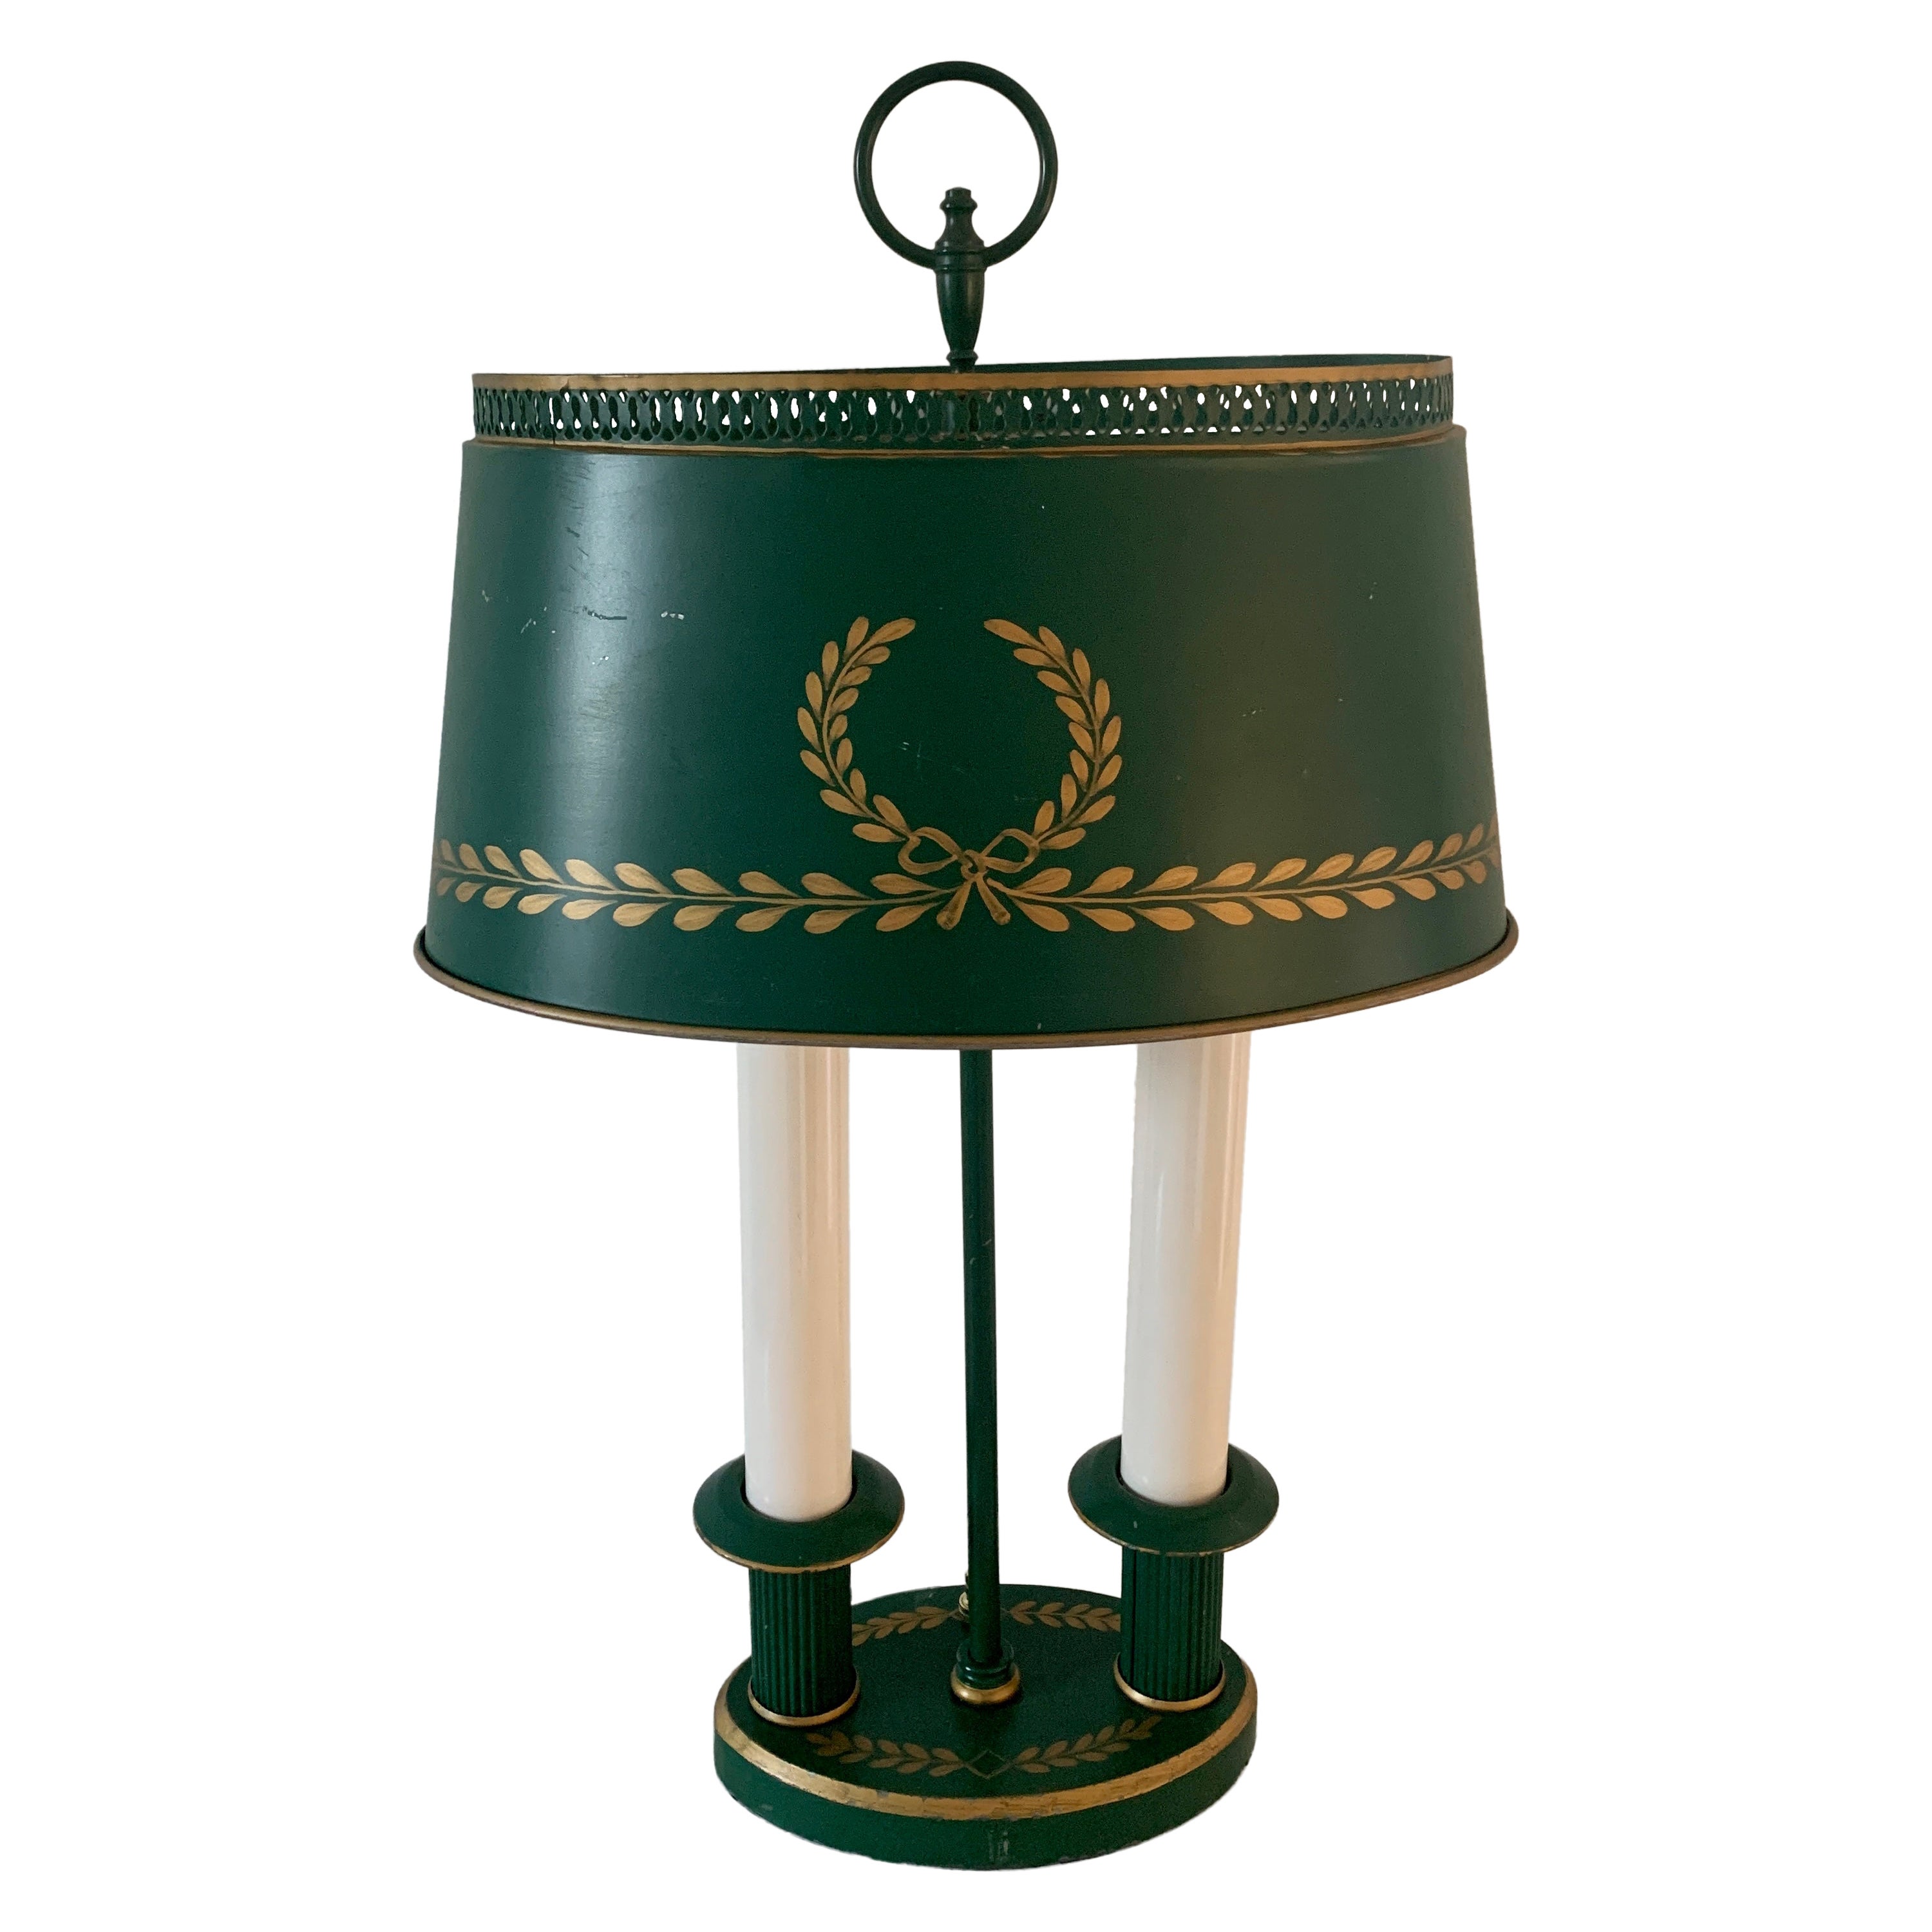 Mid-20th Century French Regency Green and Gold Tole Bouillotte Lamp For Sale